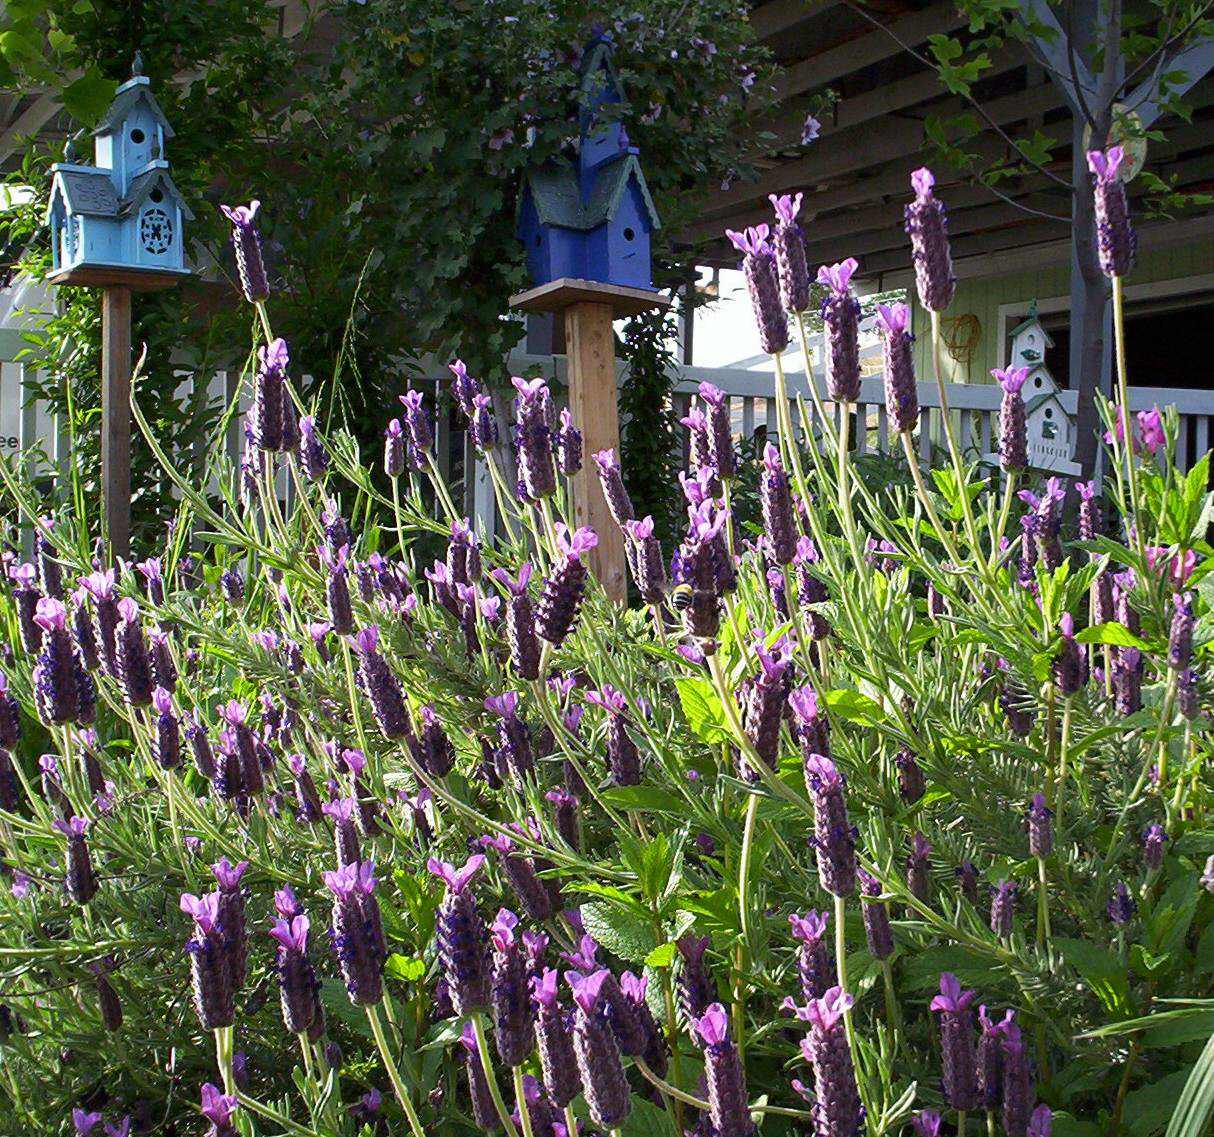 Home of Lavender Fanatic Specialty Lavender Products.